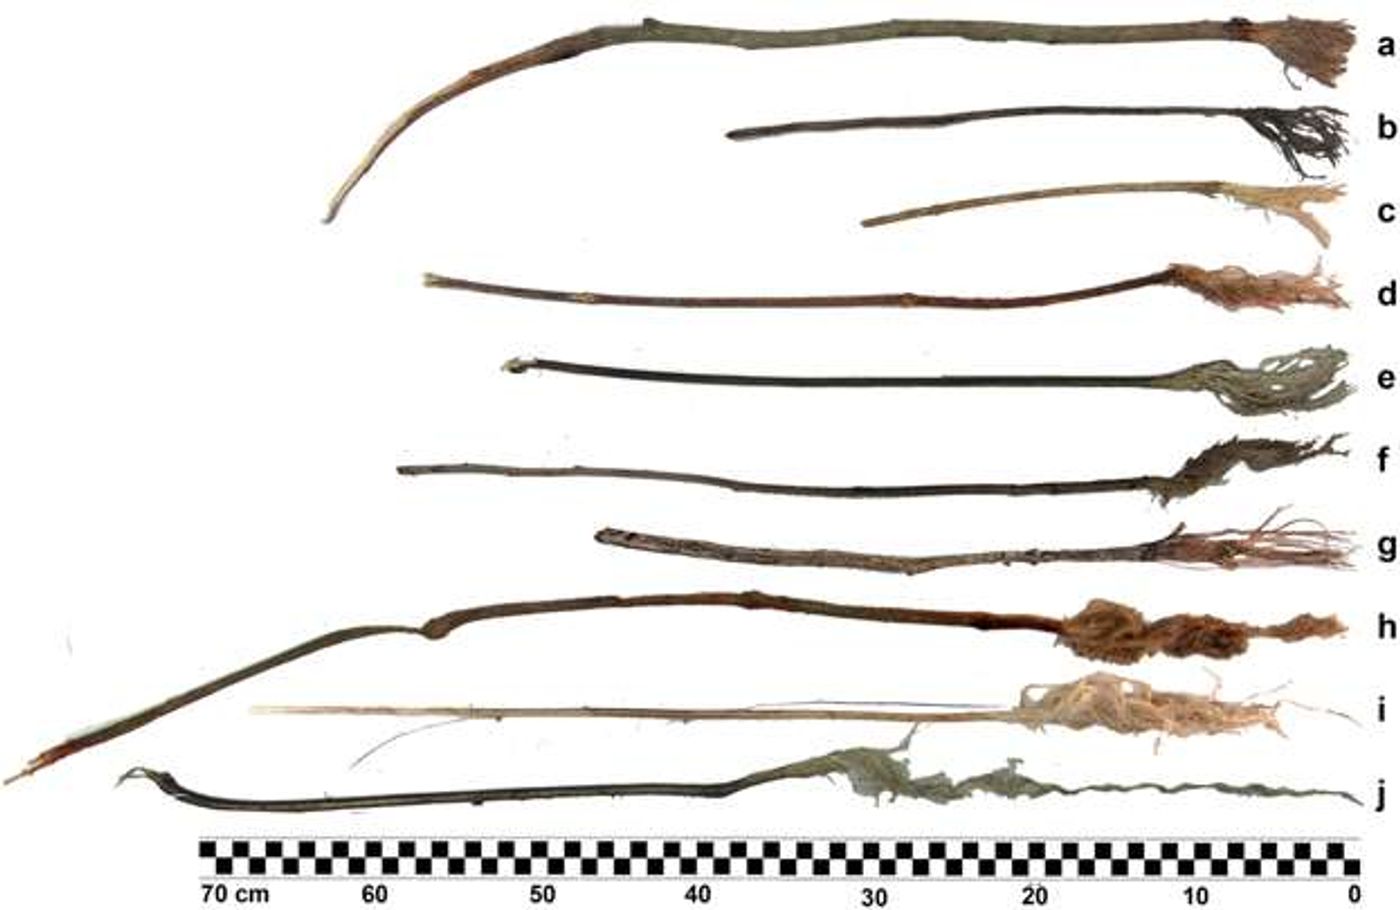 Examples of sticks and twigs that were chewed by chimps to collect water.